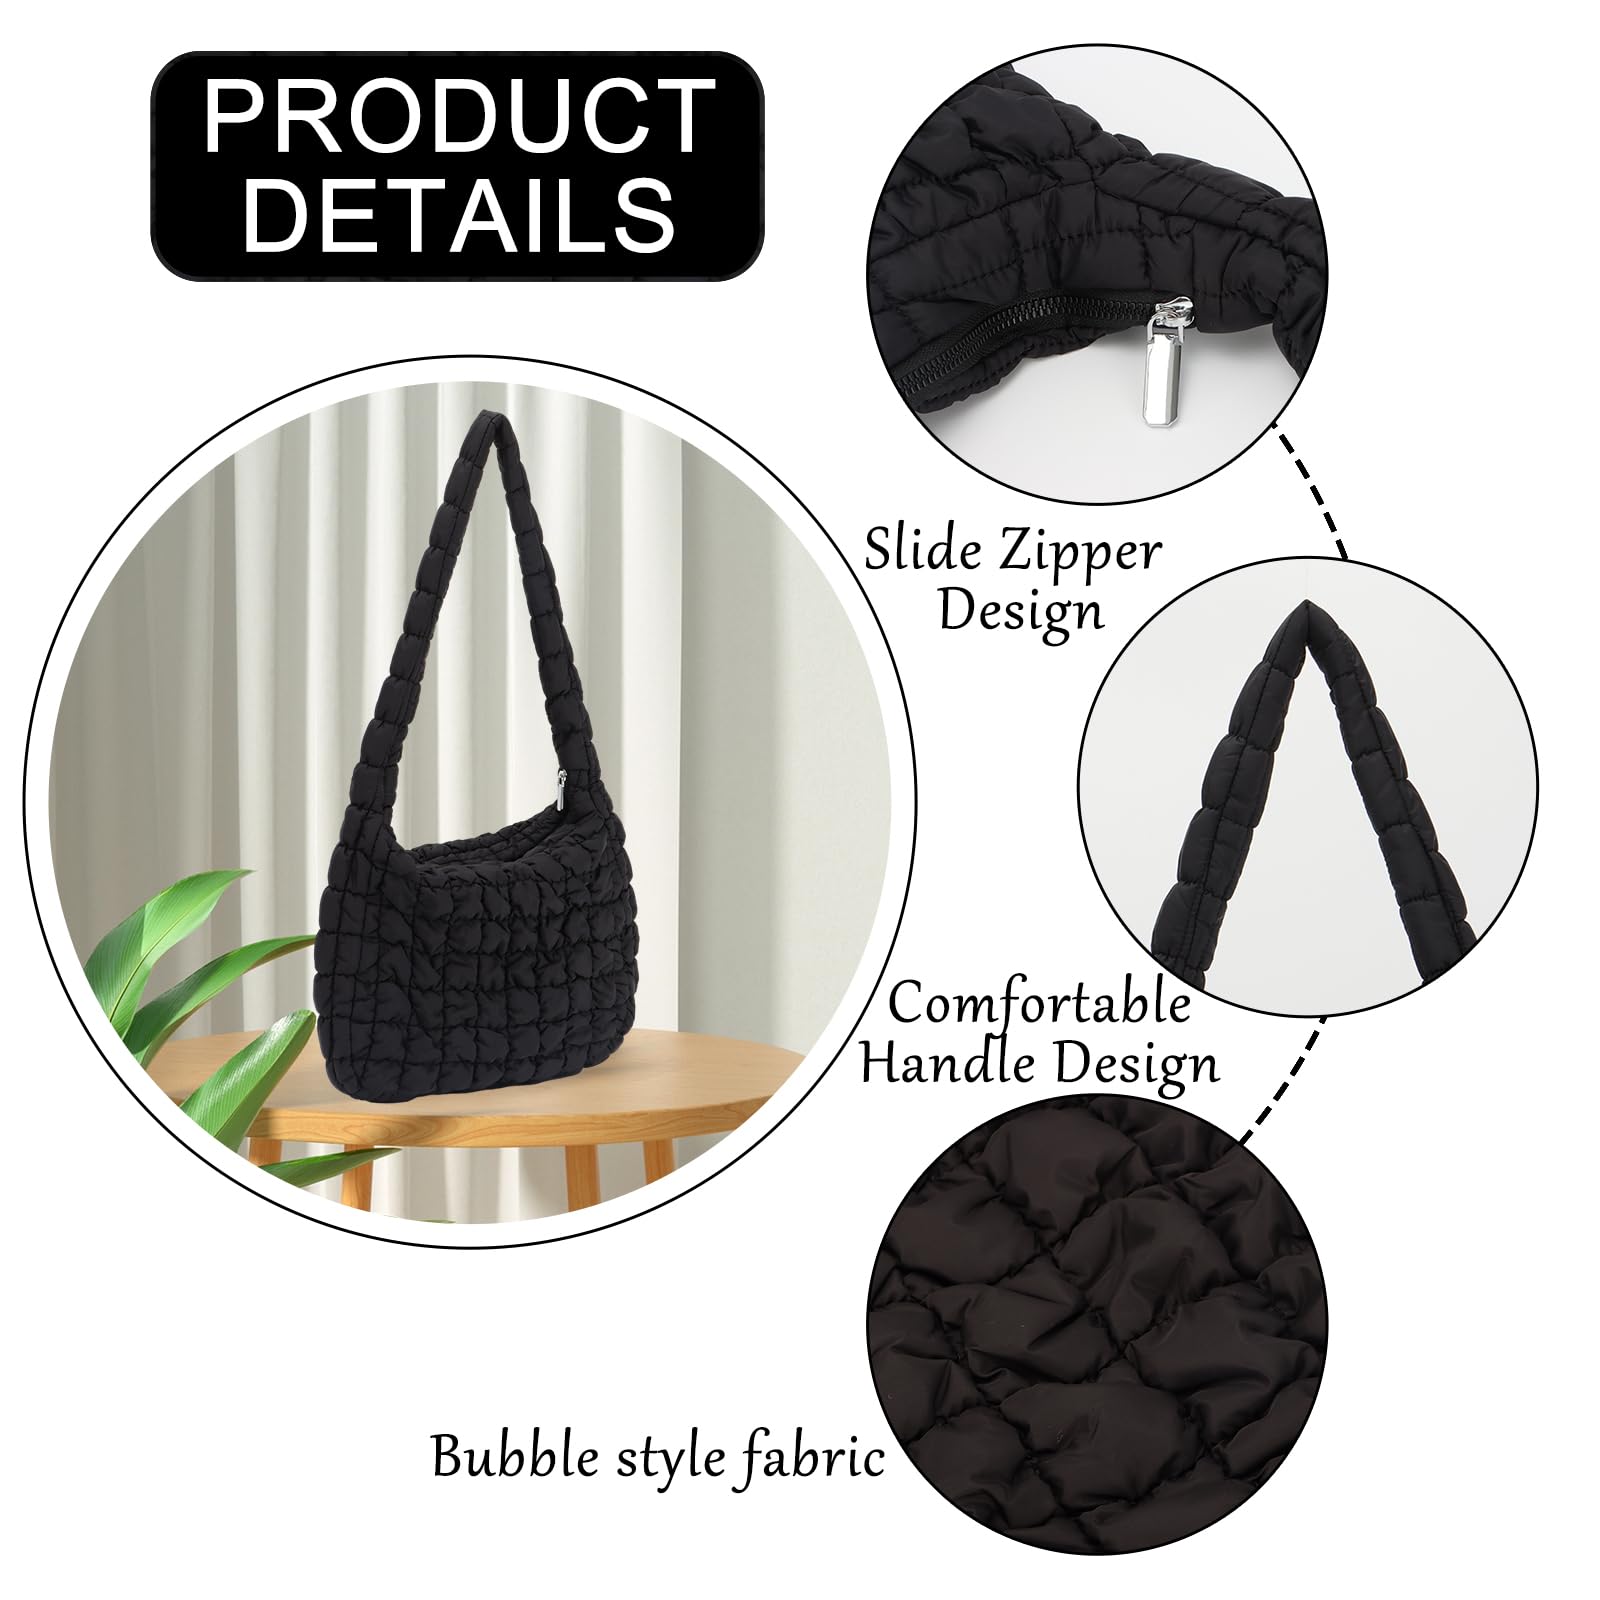 GOKTOW Puffer Quilted Carryall Bag,Quilted Shoulder Bag,Puffy Tote Bag Purse,Large Nylon Hobo Handbag